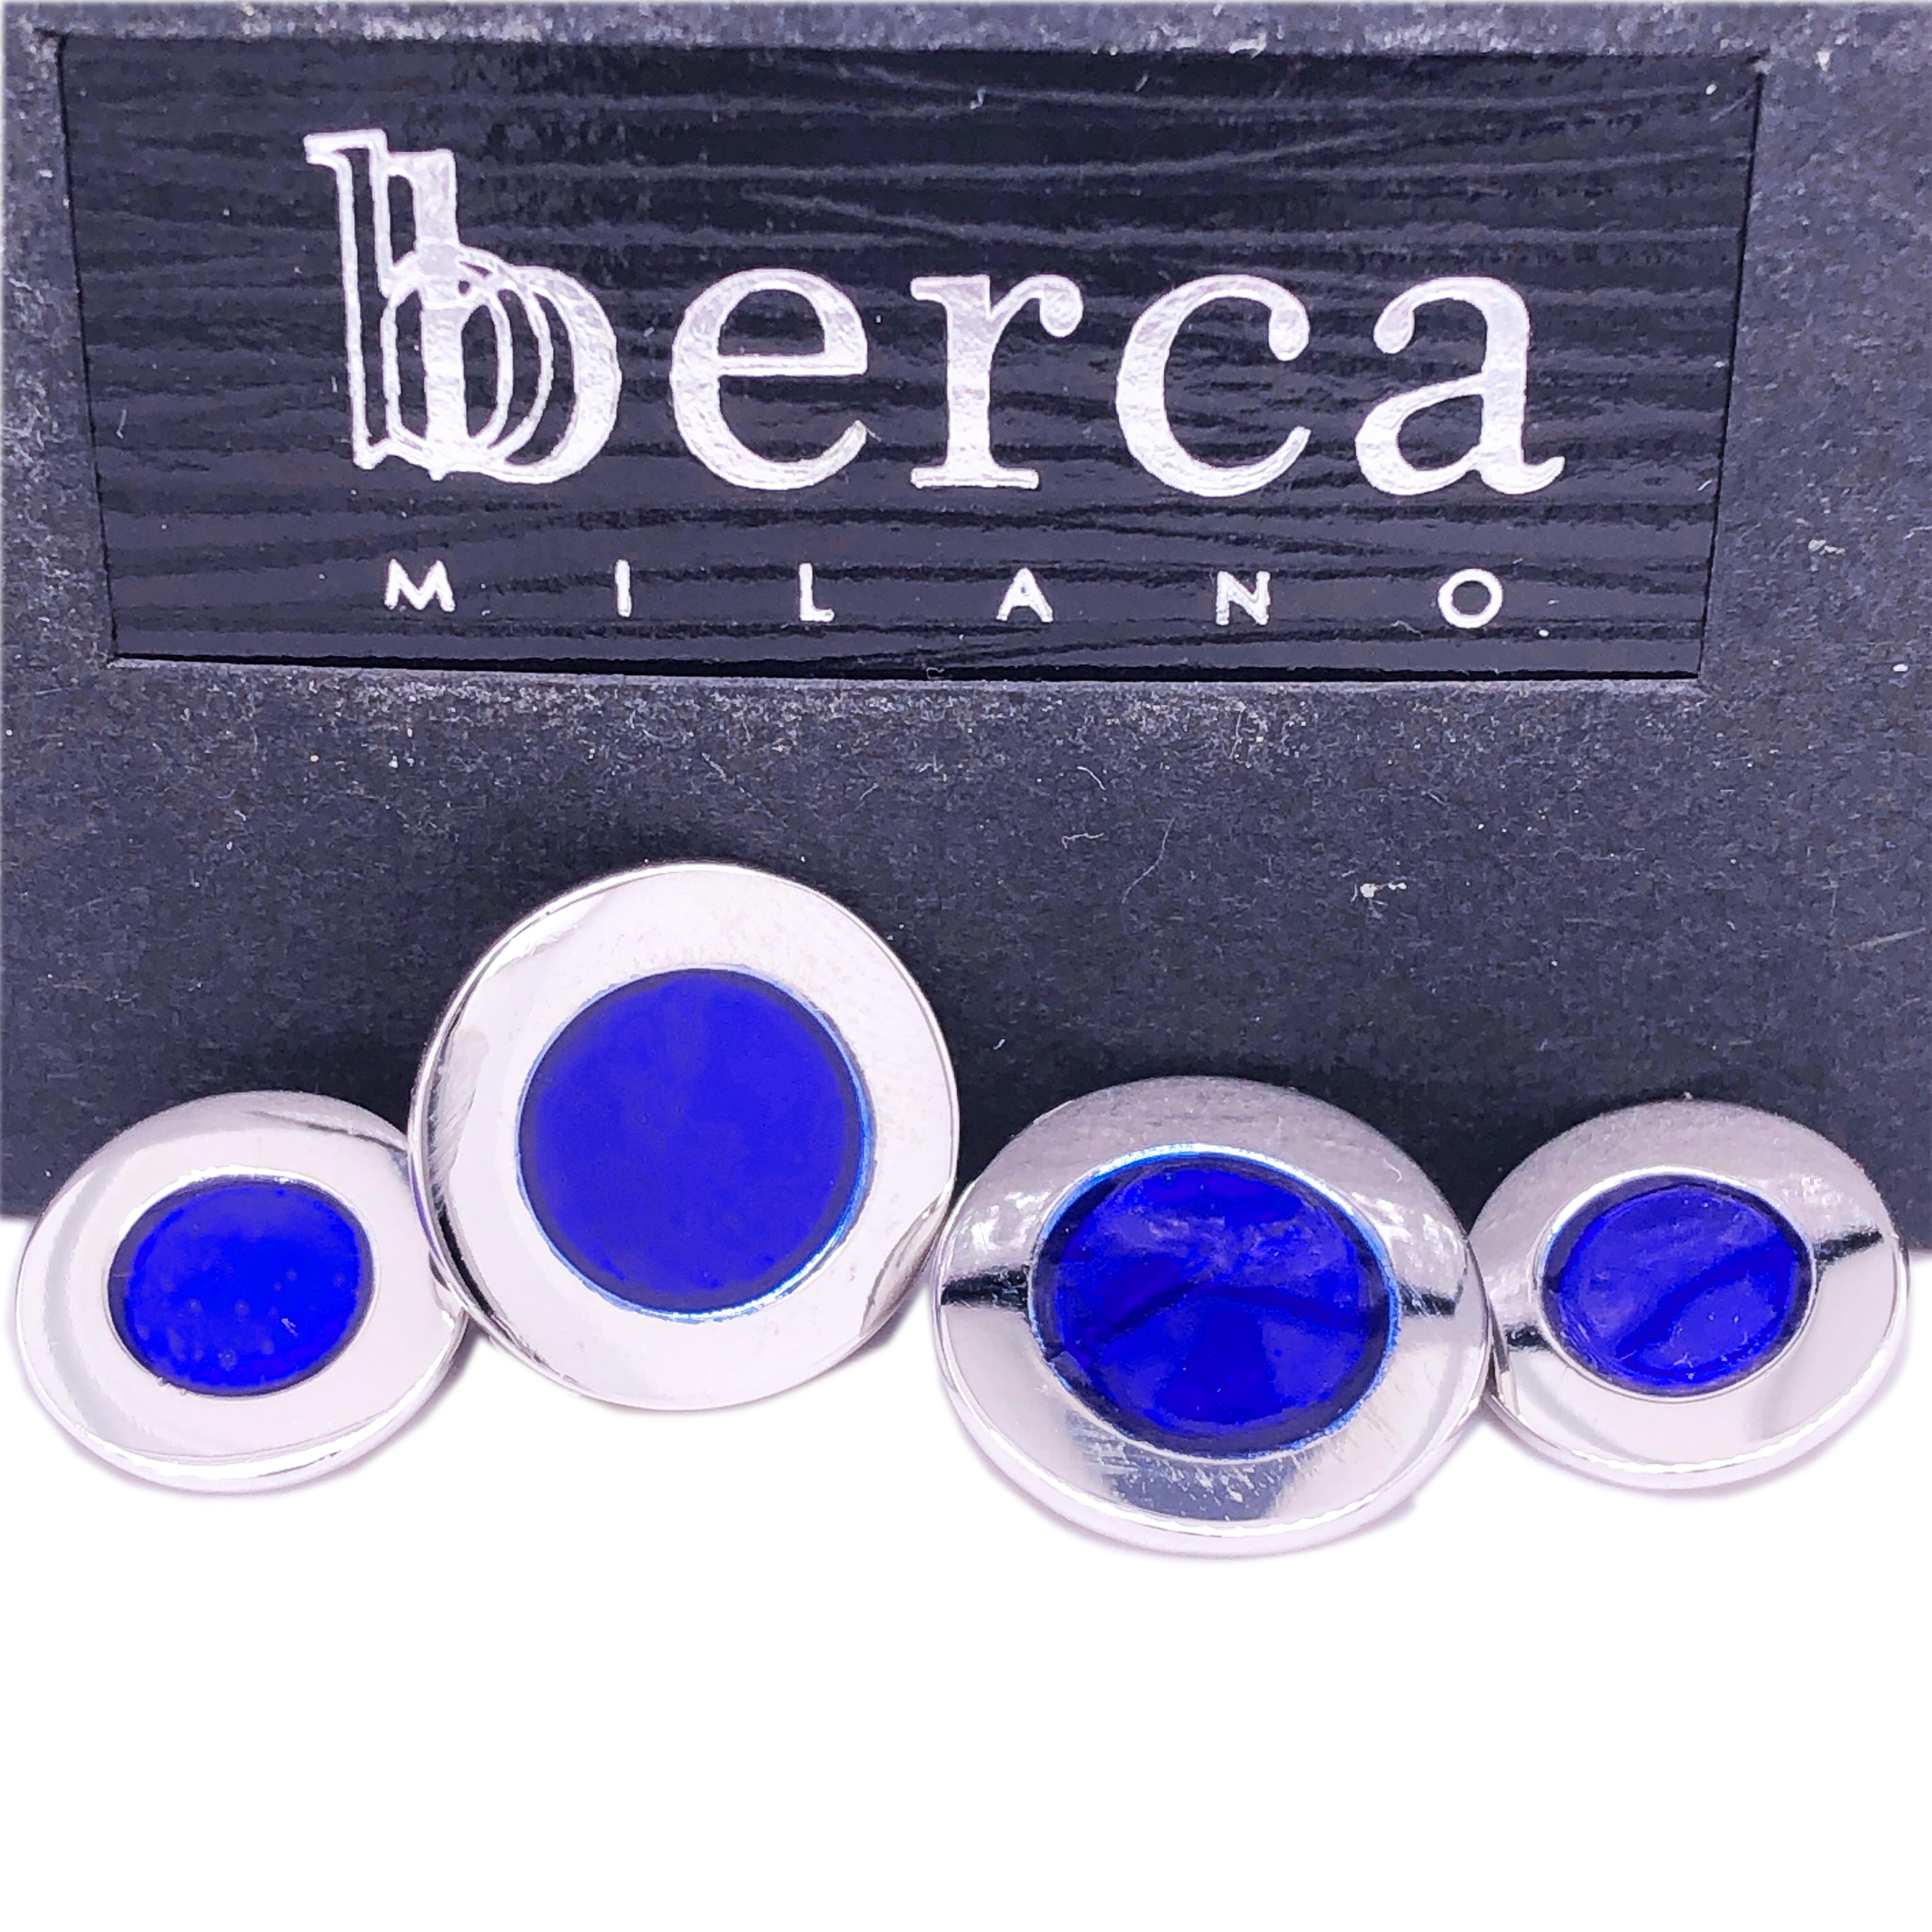 Chic yet Timeless Round, Mirror Finish, Transparent Navy Blue Hand Enamelled Sterling Silver Cufflinks.

In our Smart Black Box and Pouch.

Front Diameter about 0.633 inches.